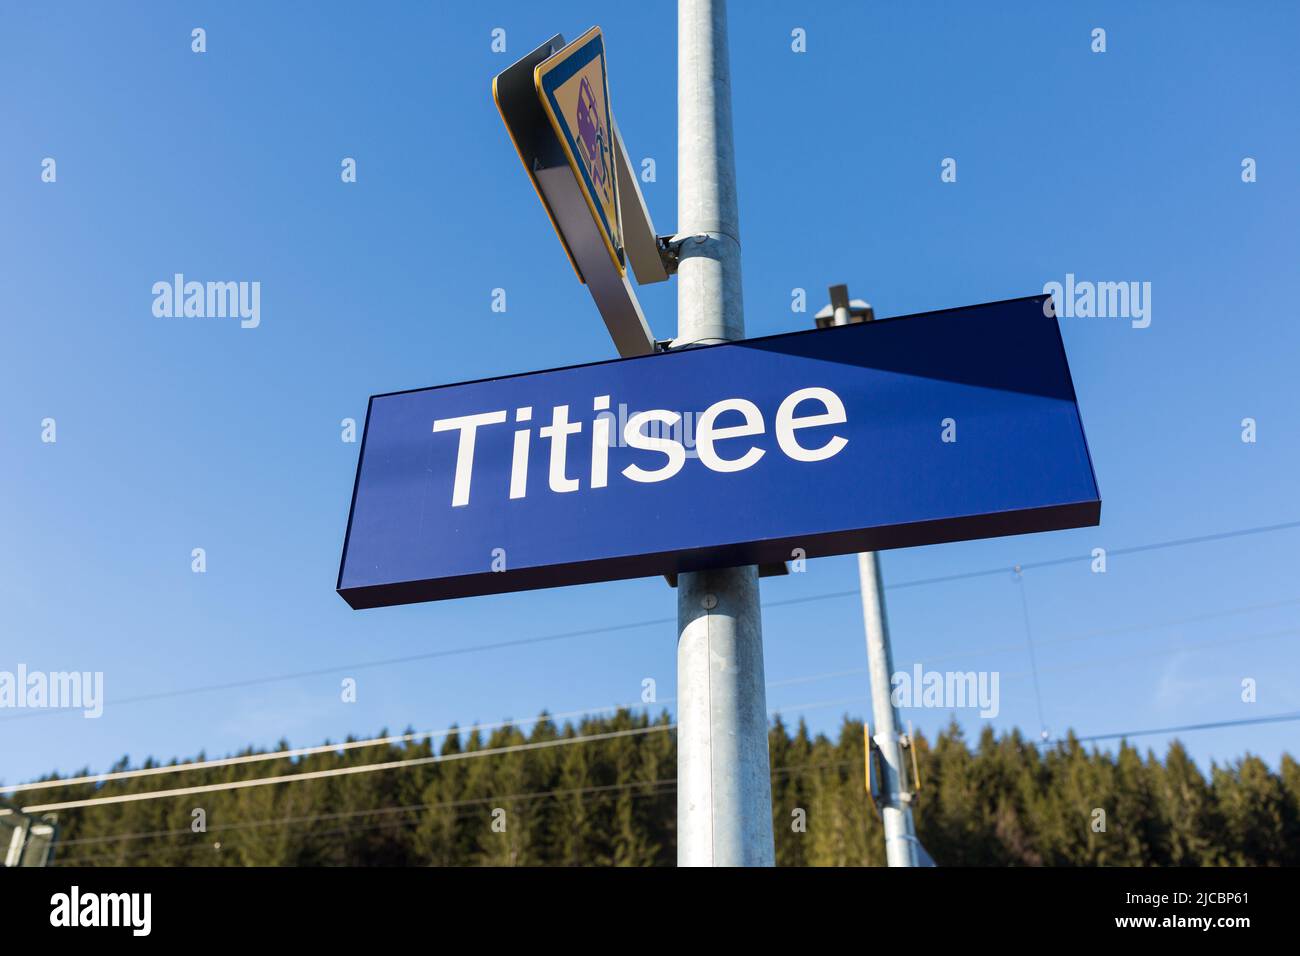 Titisee, Germany - Nov 21, 2021: Sign Titisee at the Titisee railway station. Famous sightseeing destination in the black forest. Stock Photo